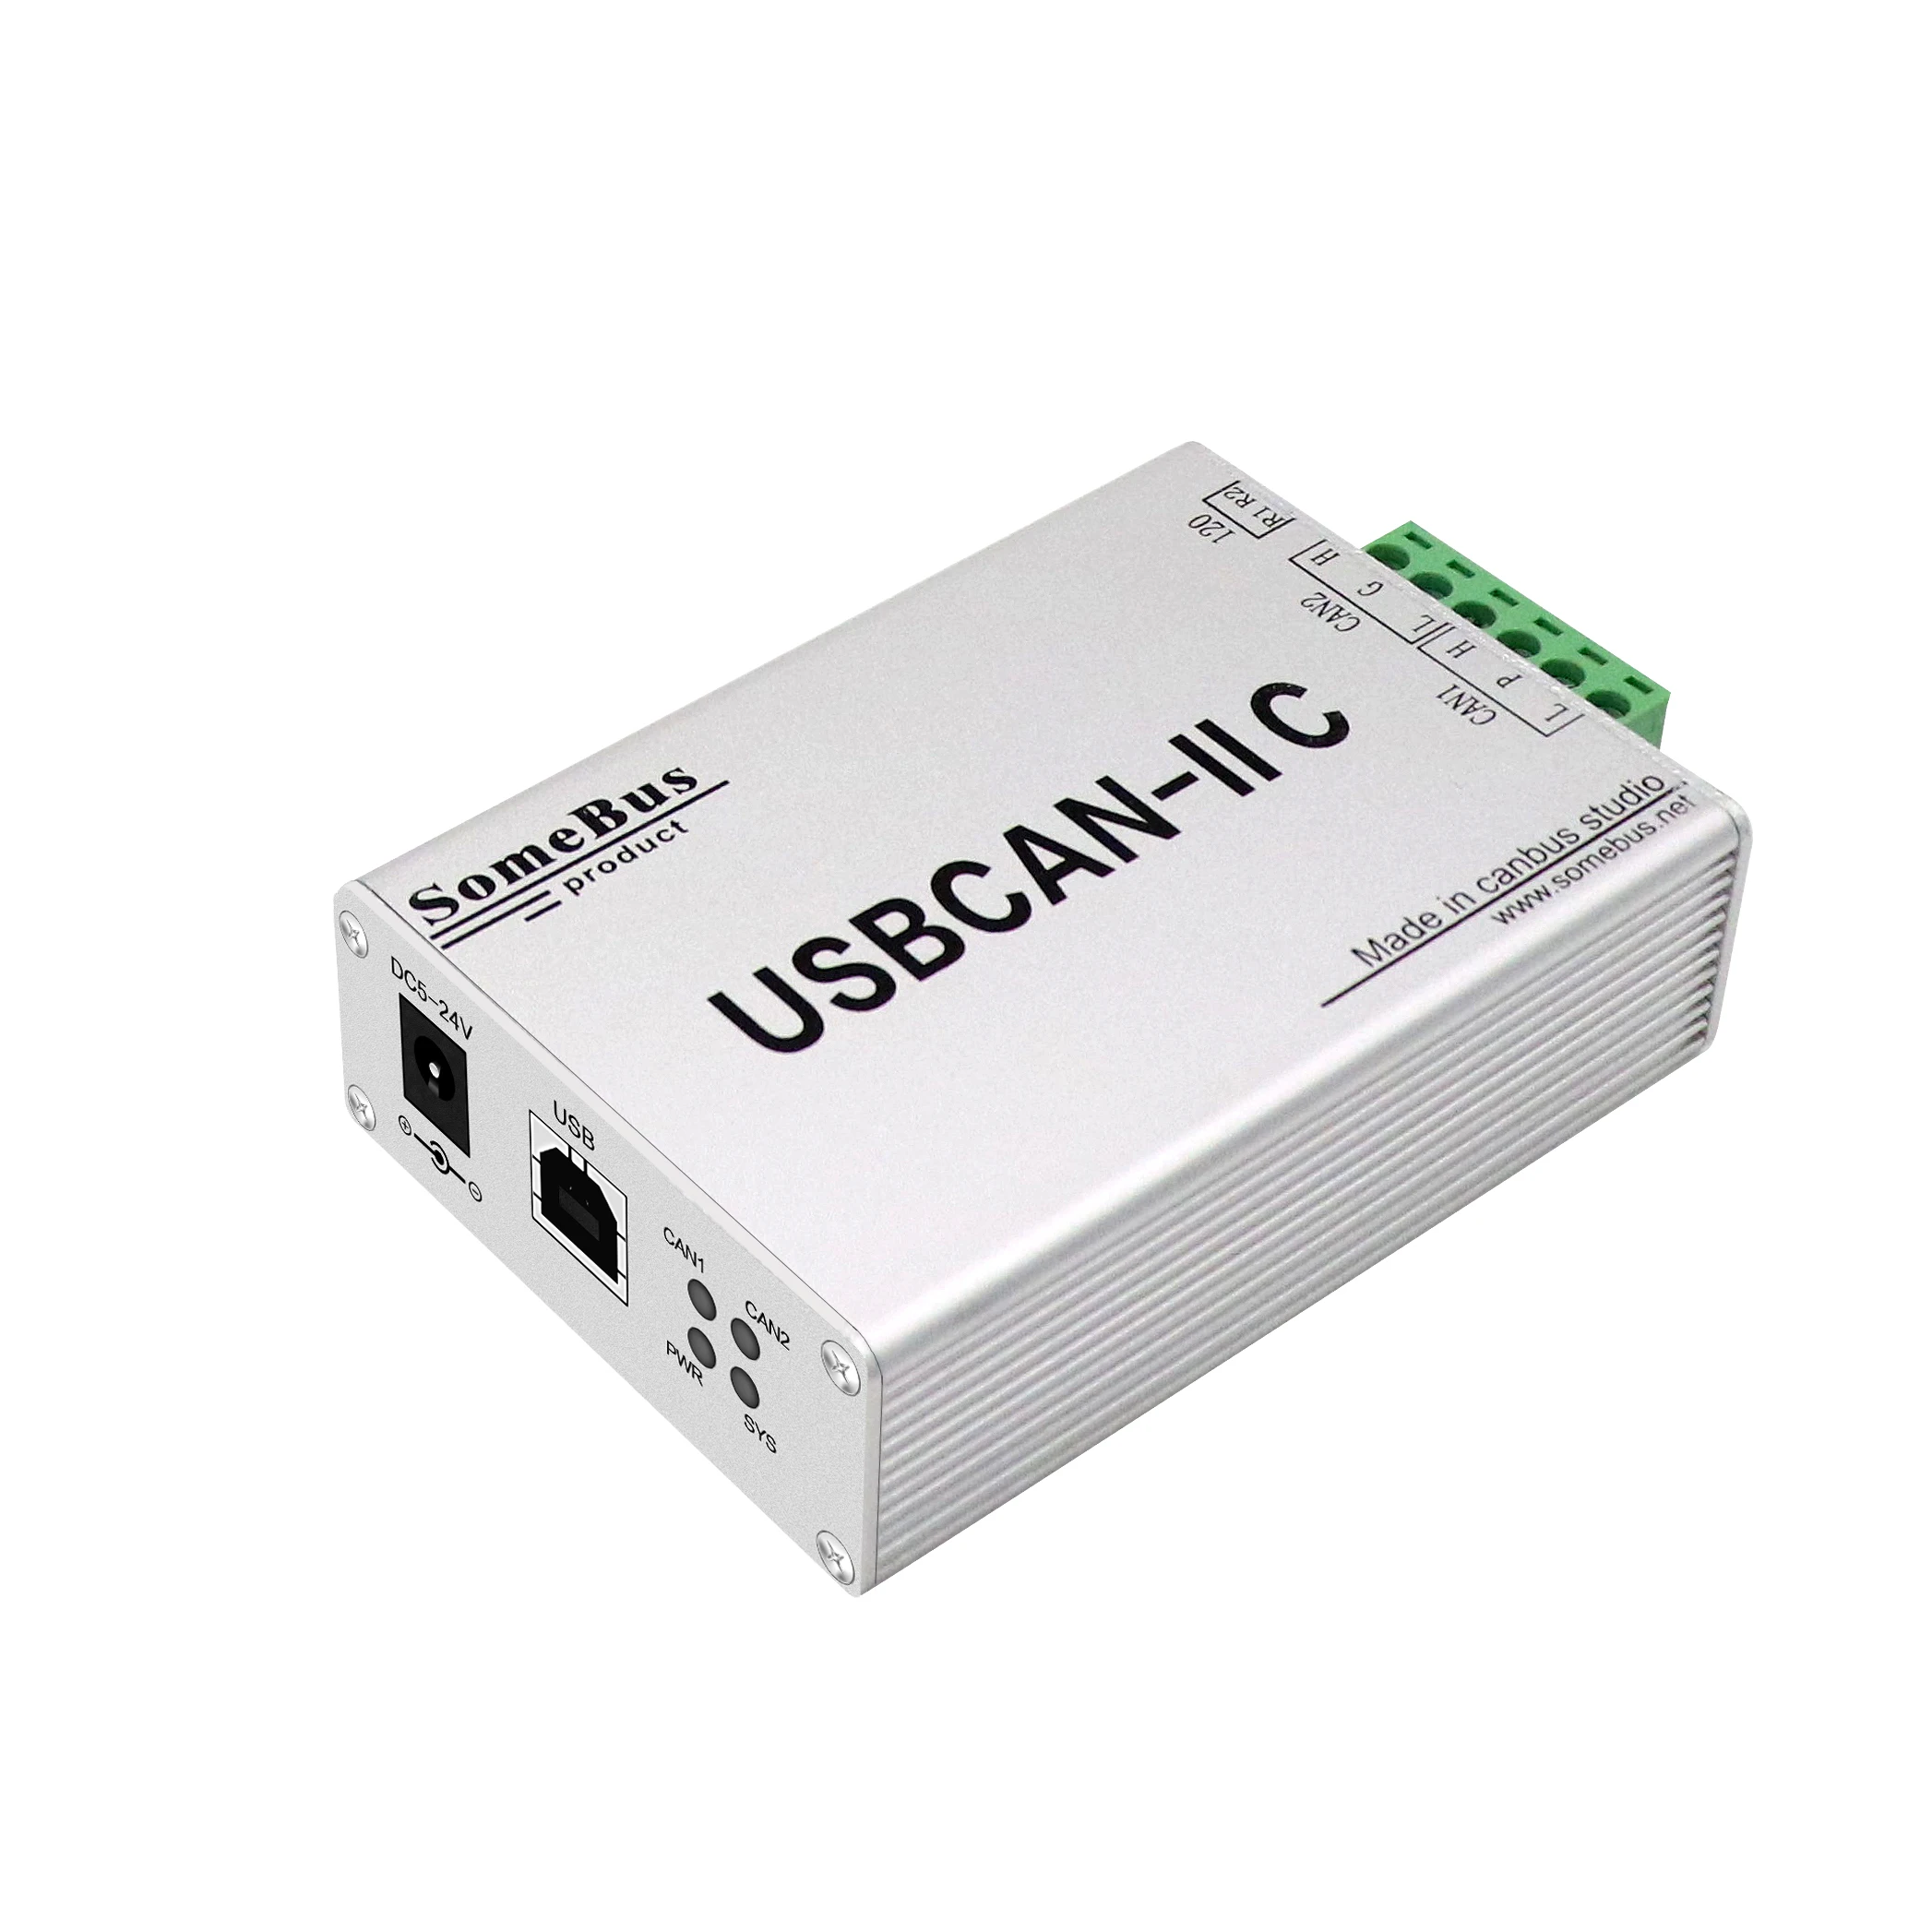 GCAN Ecantools Usb Can Bus Adapter Data Logger Software Test And Operating System Usbcan-Ⅱc Used For Laboratory Bus Control